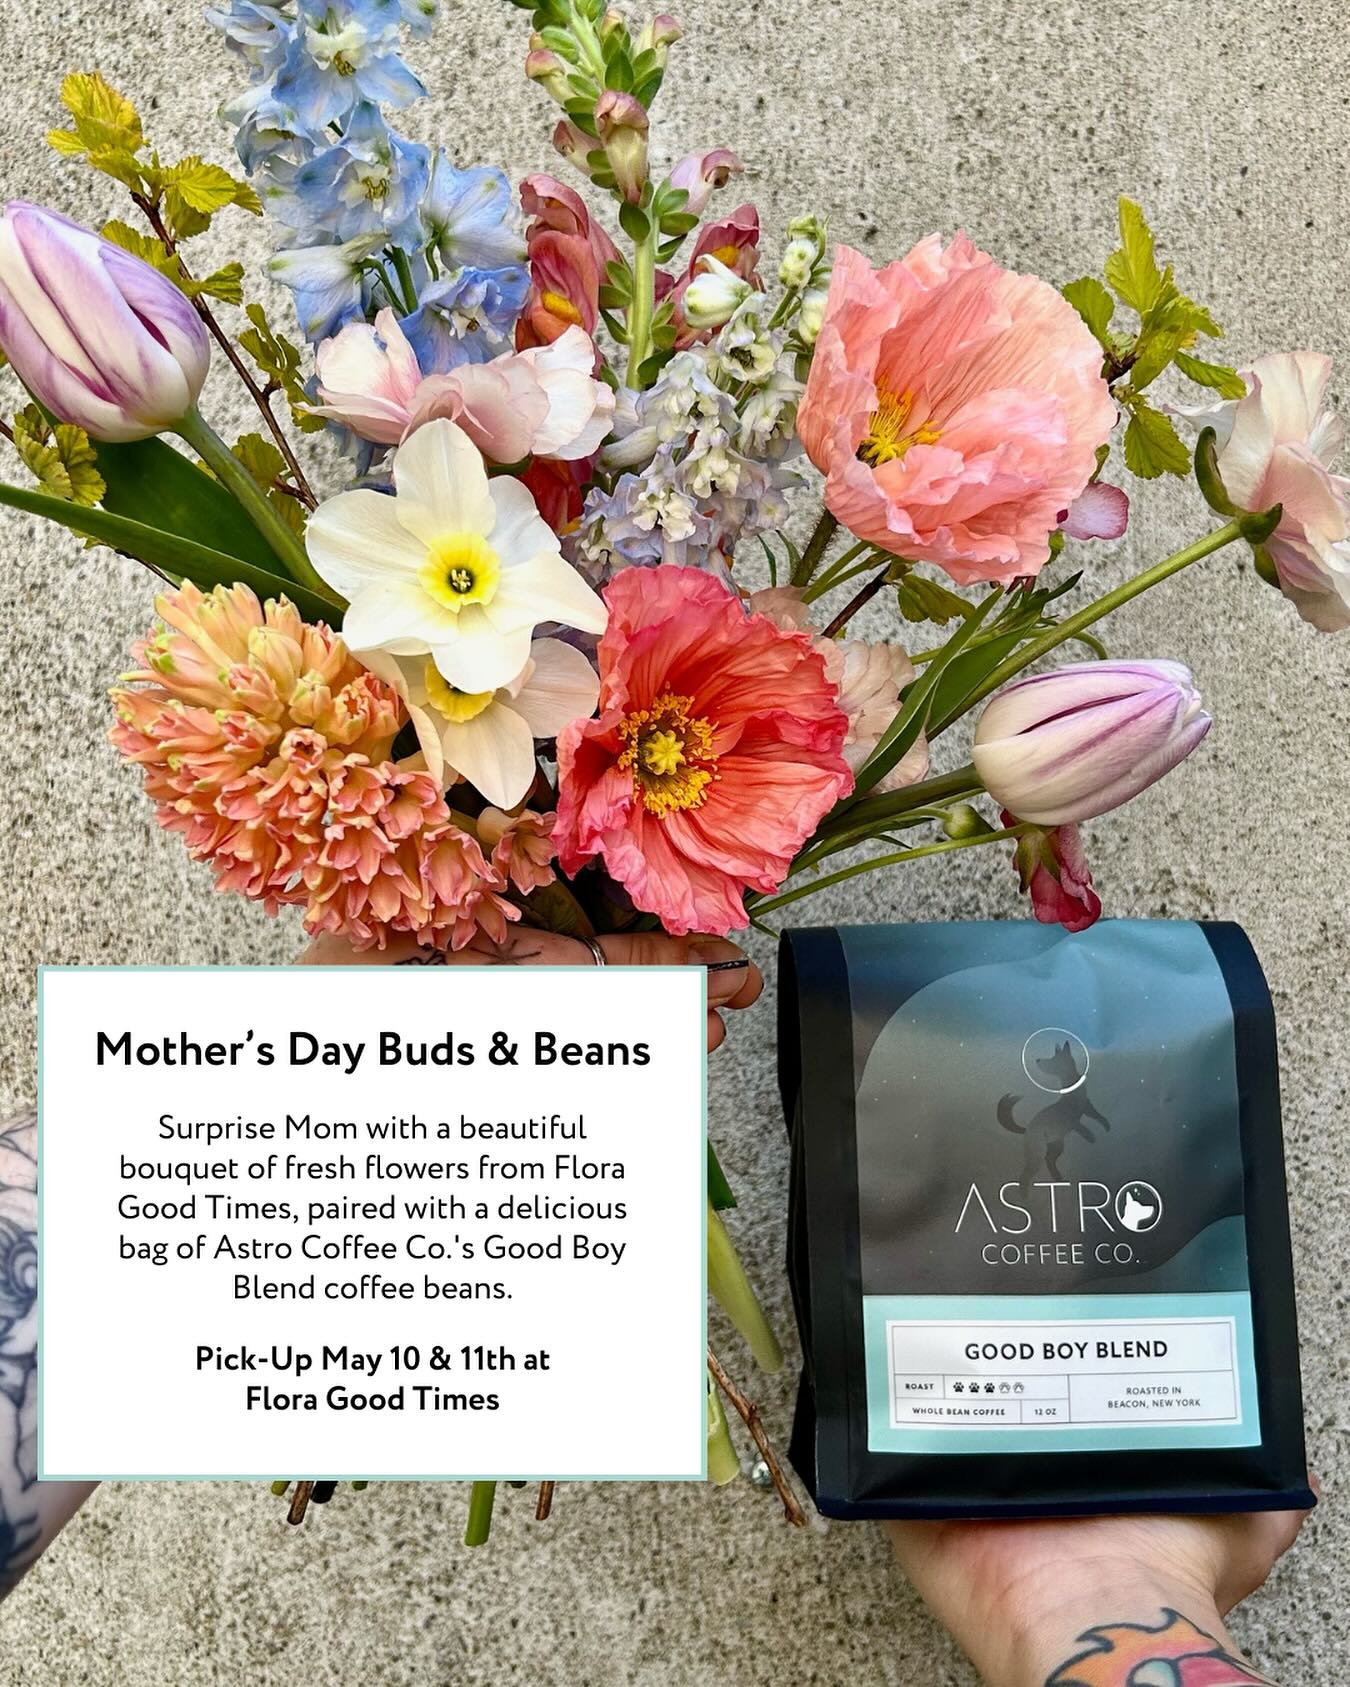 Are you ready for Mother&rsquo;s Day this weekend? We&rsquo;ve got you covered! 💐☕️

Astro Coffee Co. &amp; Flora Good Times are teaming up for a special Buds &amp; Beans event this Mother&rsquo;s Day Weekend.

For just $50, you can surprise Mom wit